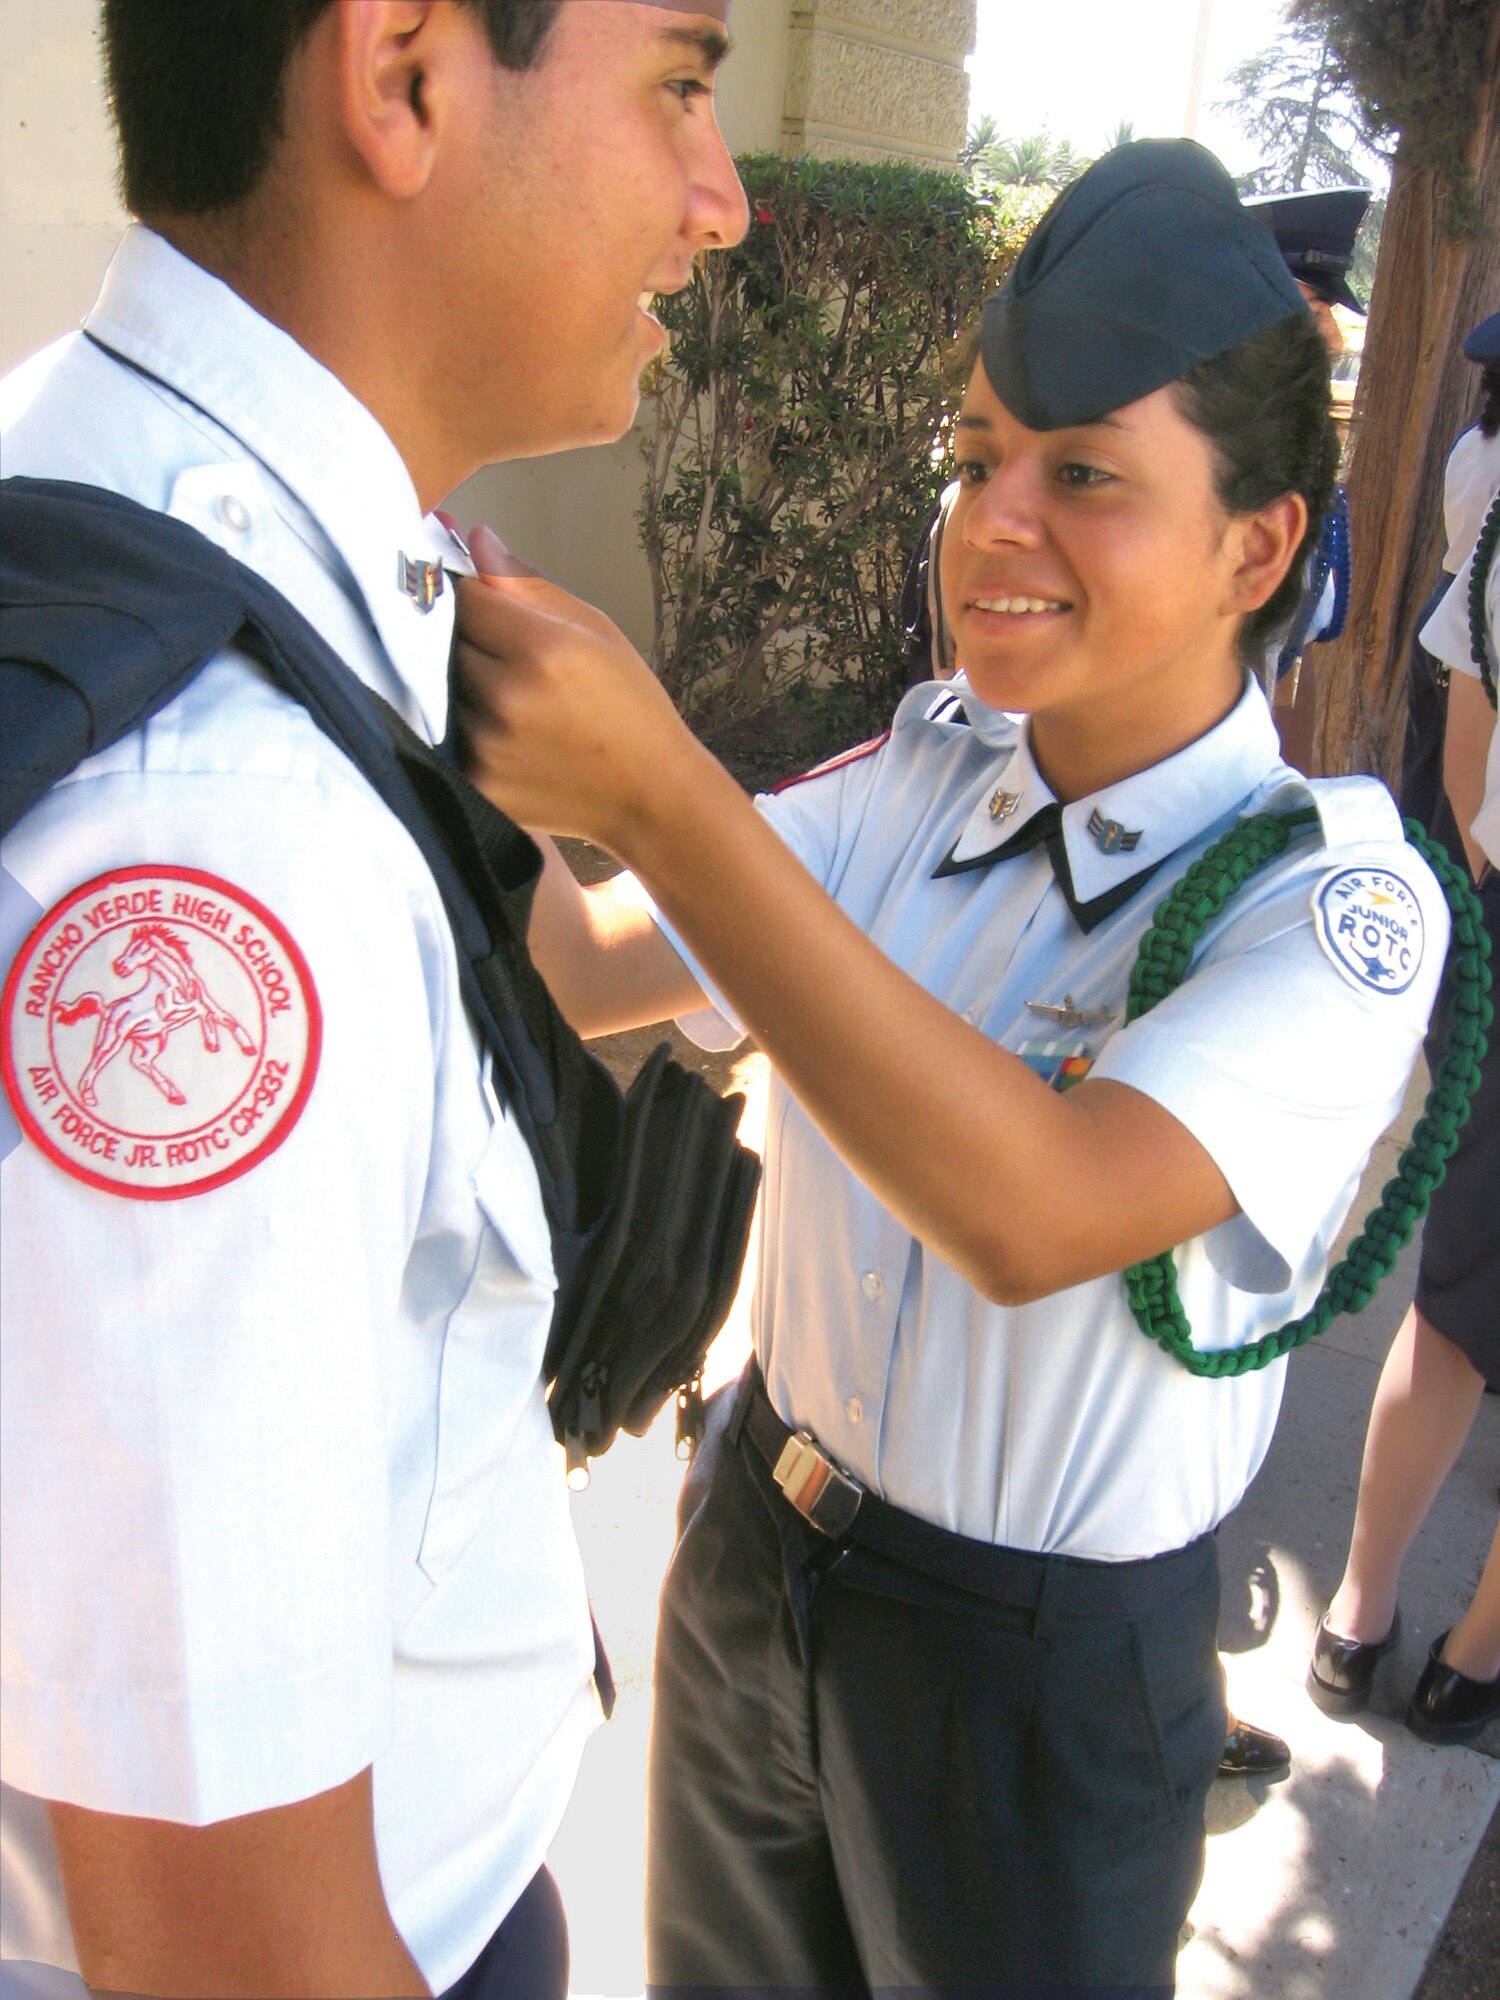 SELF INSPECTION: Junior ROTC Cadet Airman 1st Class Randy Larin adjusts the rank of fellow cadet Alex Lazo before their graduation ceremony at the Cultural Resource Center on base. Both students are incoming sophomores at Rancho Verde High School in Moreno Valley, Calif. (U.S. Air Force photo by Staff Sgt. David K. Flaherty)